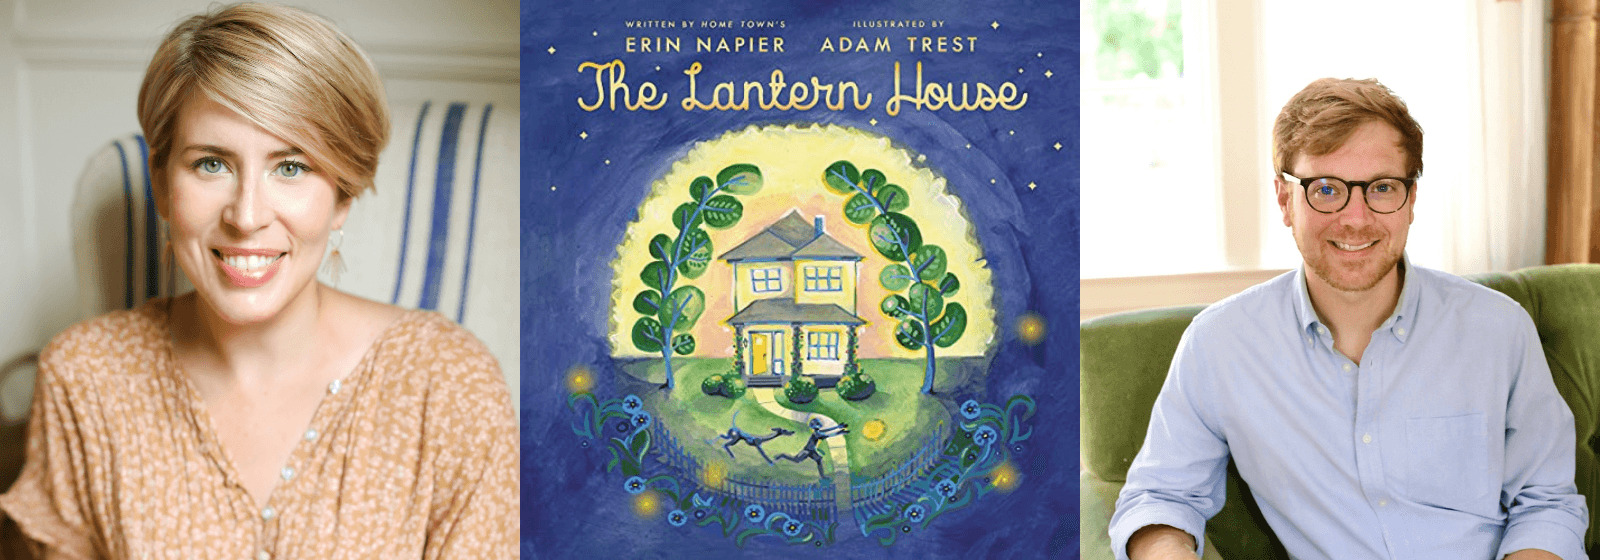 The Lantern House Book Signing with Erin Napier, Adam Trest